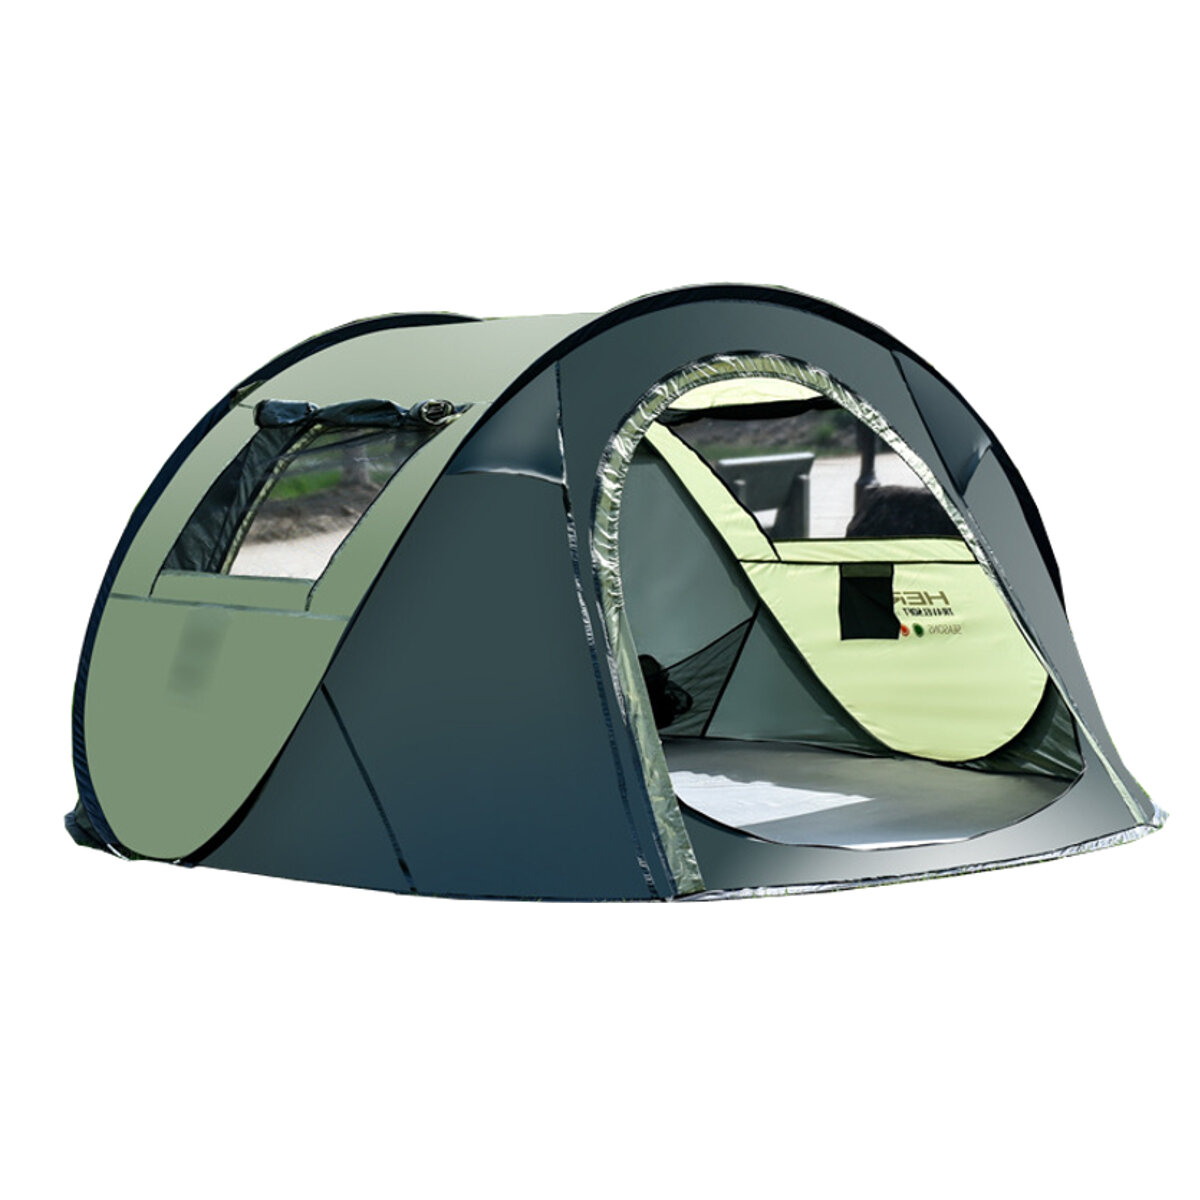 5-8 Person Waterproof Camping Tent Automatic Pop Up Quick Shelter Outdoor Traveling Hiking Tent-Coffee/Green